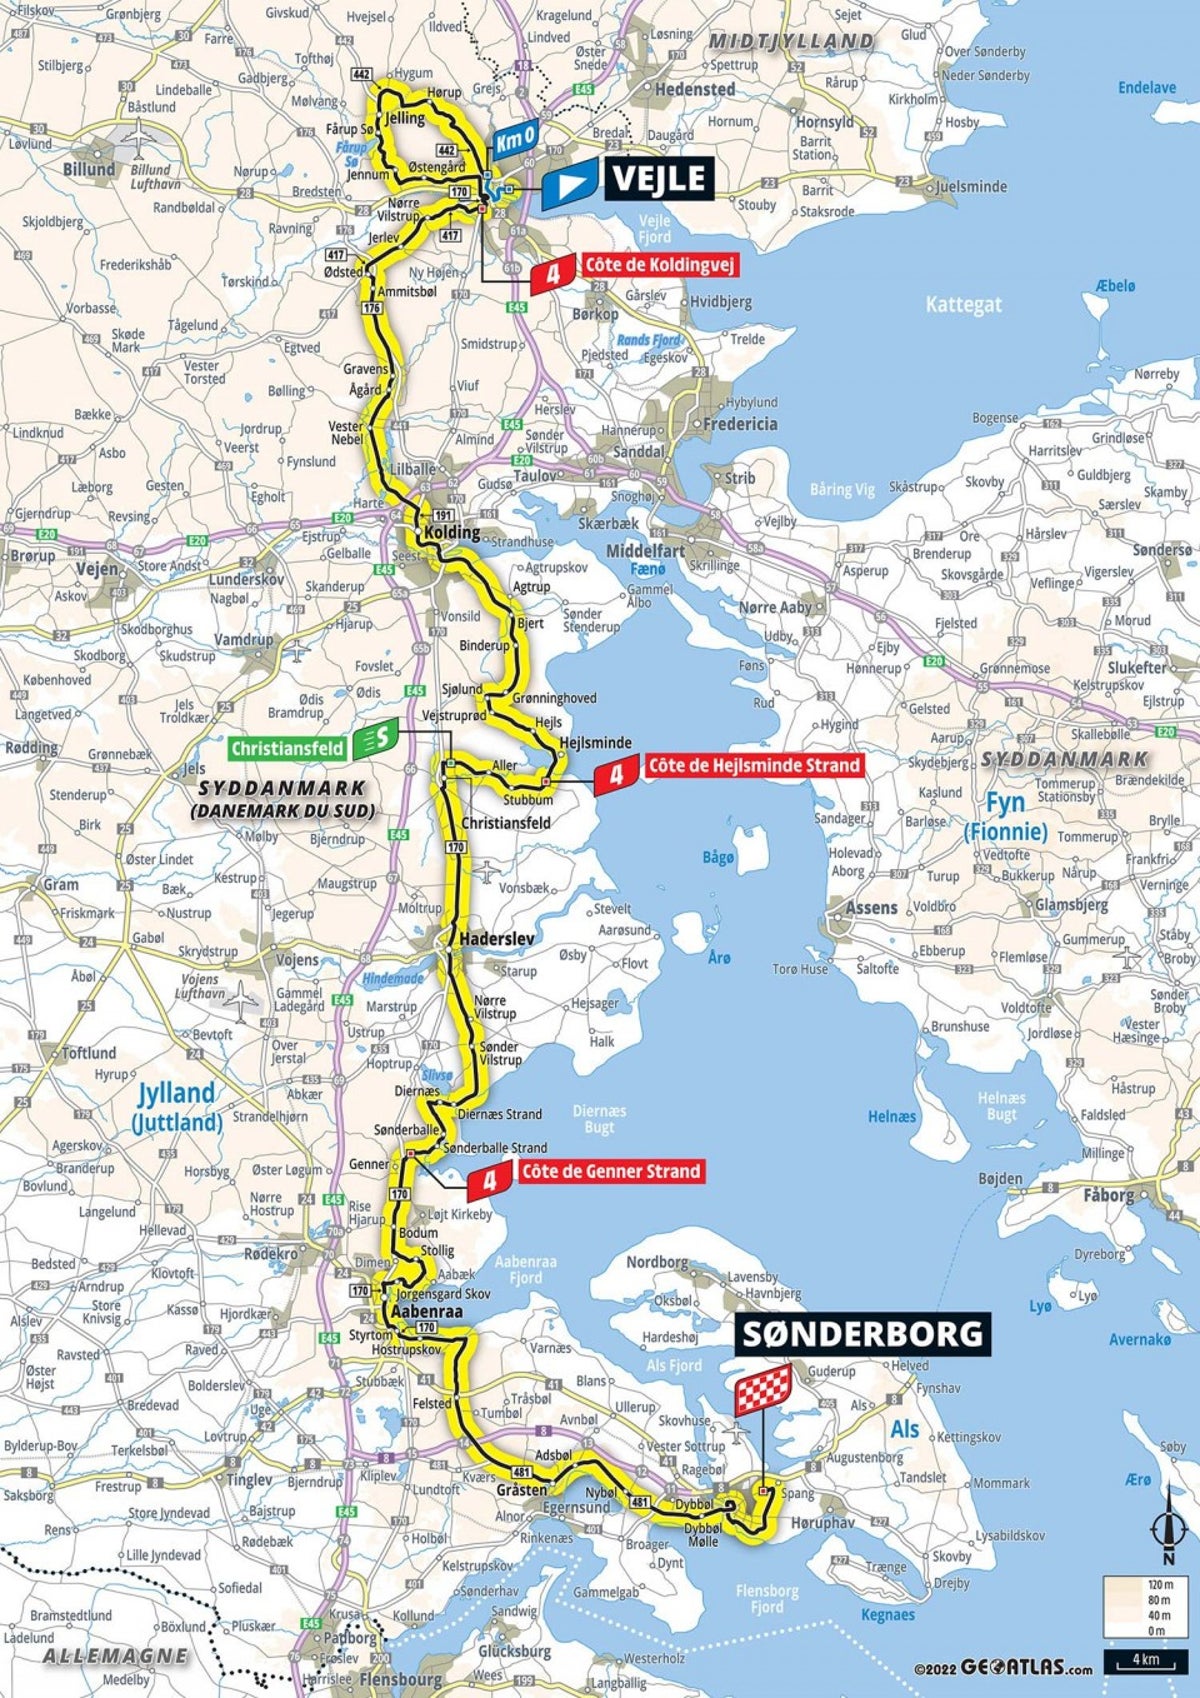 Tour de France 2022 Stage 3 preview: Route map and profile as Fabio Jakobsen eyes another sprint win